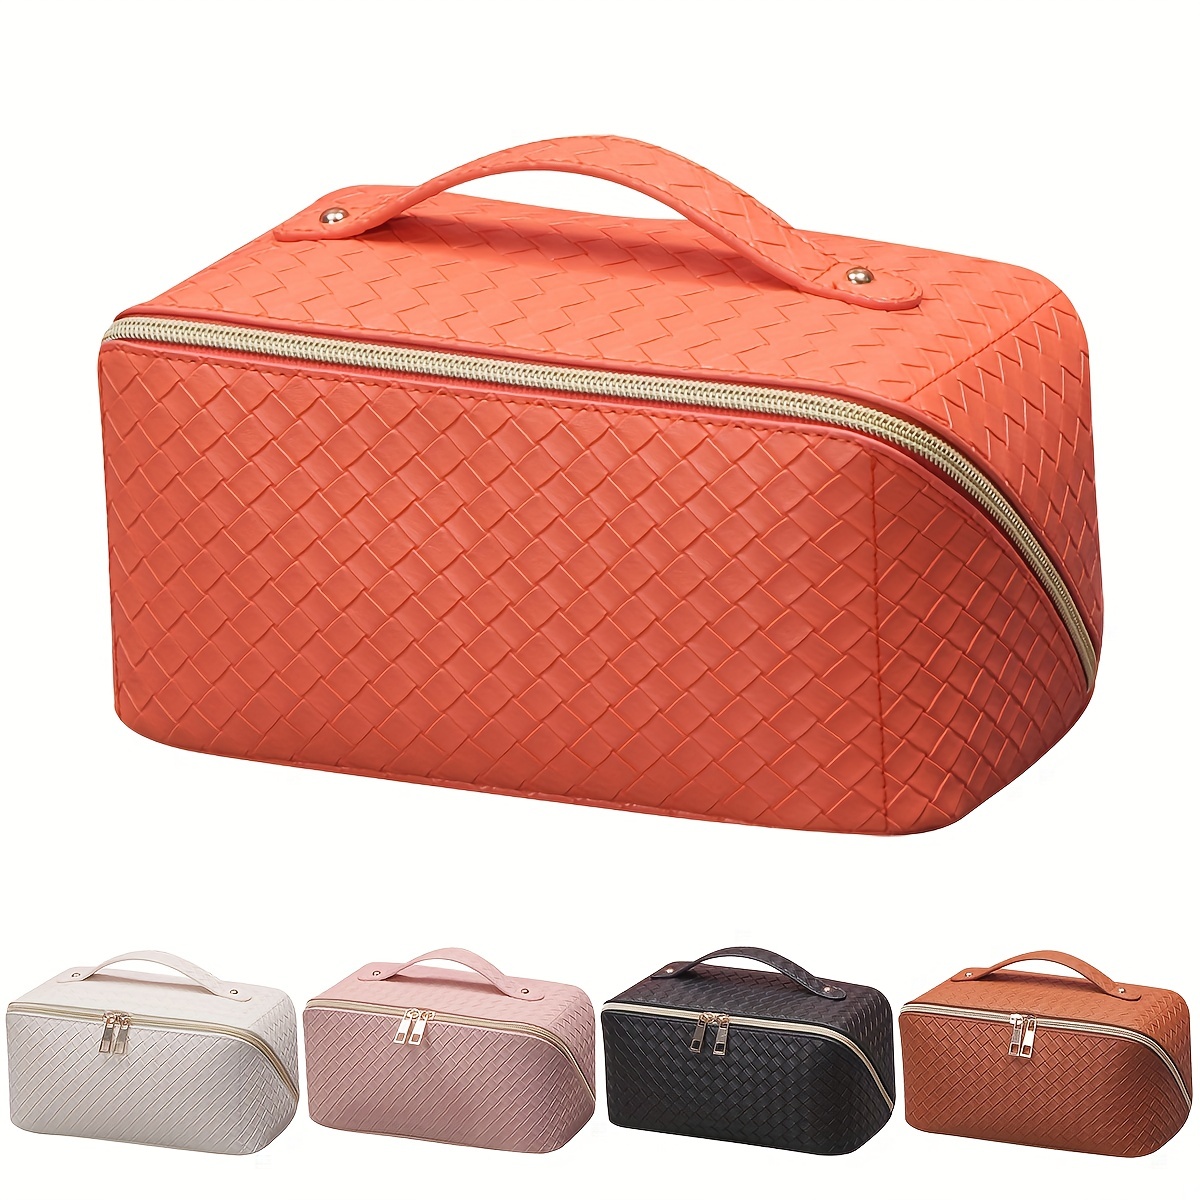  Cosmetic Travel Bag Checkered Makeup Bags For Women  Hand-Portable PU Leather Waterproof Cosmetic Bag with Adjustable Dividers Toiletry  bag Artist Storage Bag (Checkered) : Beauty & Personal Care